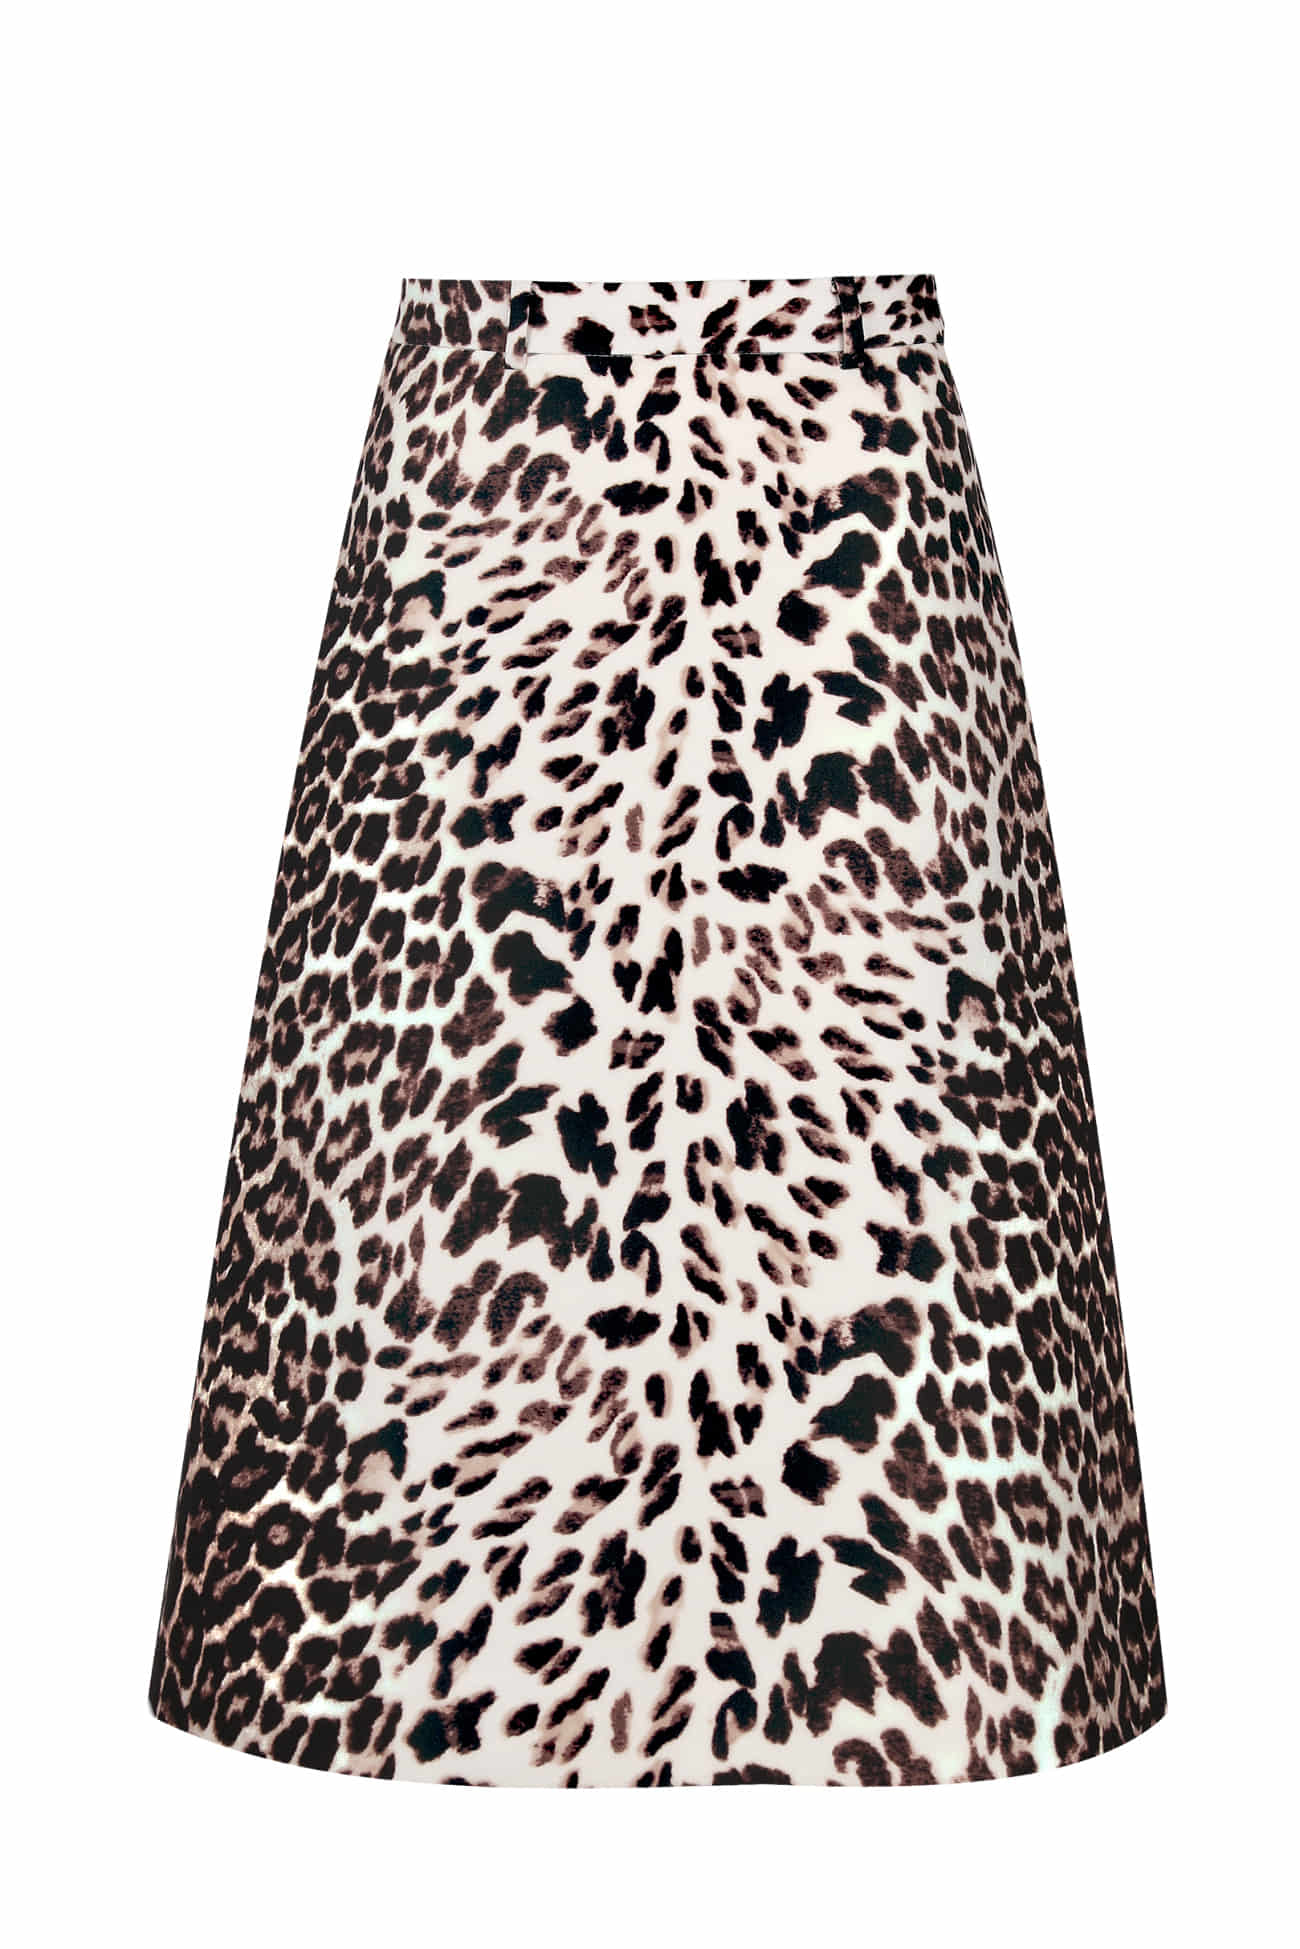 HIGH QUALITY LINE - ICONIC CLASSICAL LEOPARD SKIRT